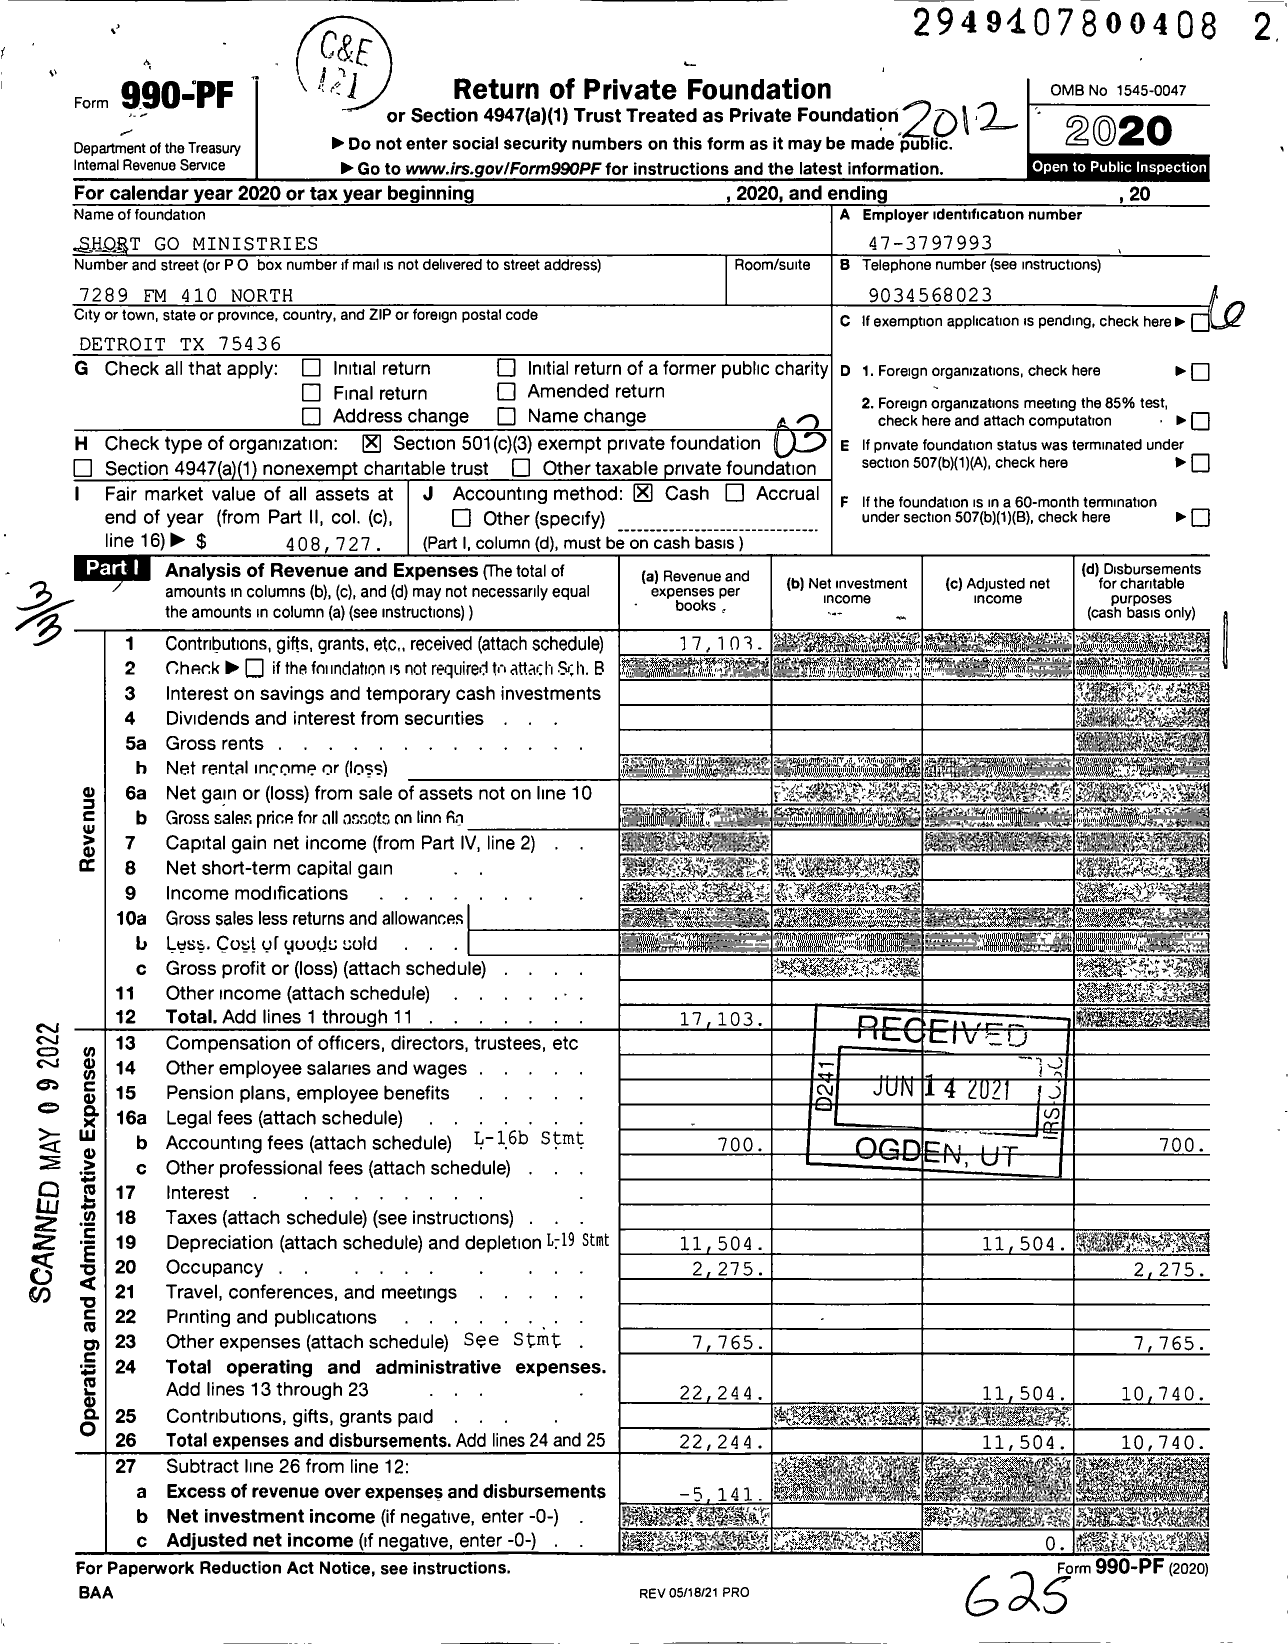 Image of first page of 2020 Form 990PF for Short Go Ministries